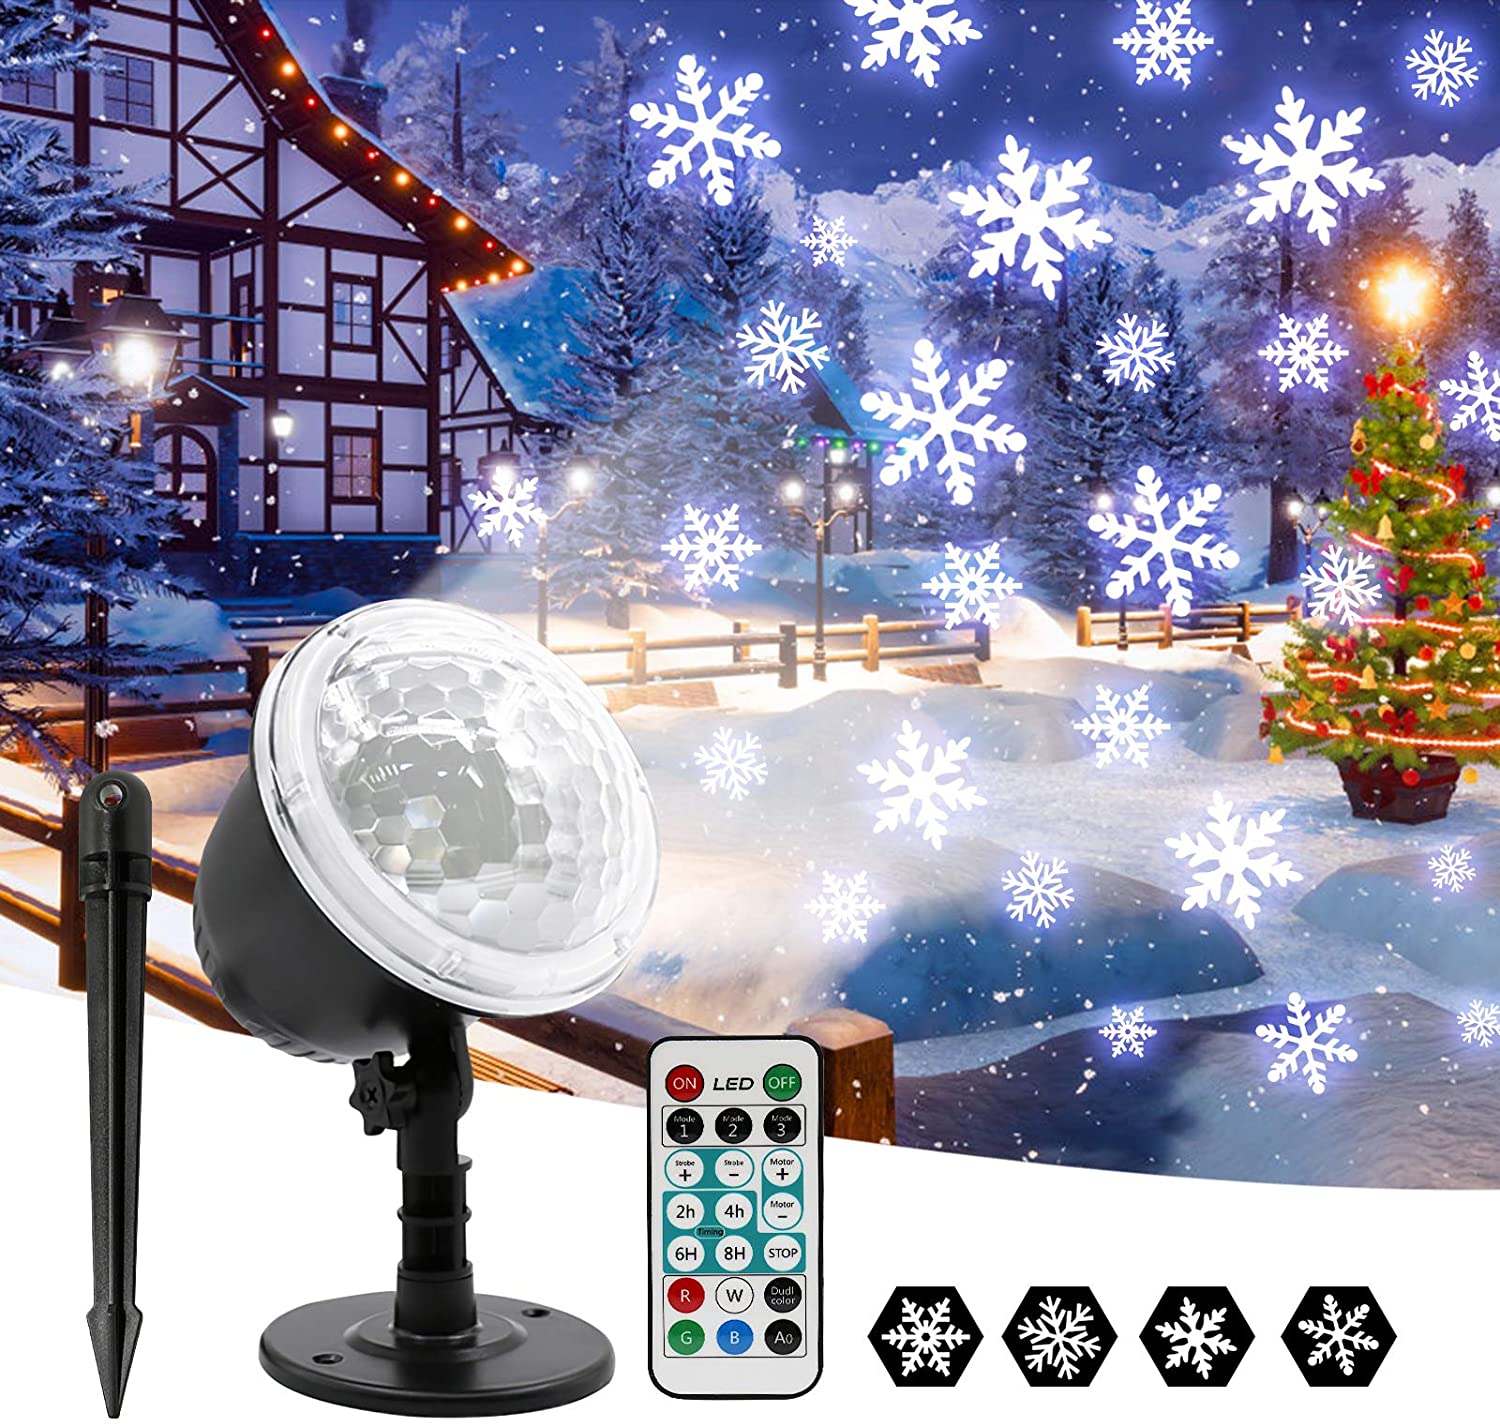 OwnZone Christmas Projector Lights